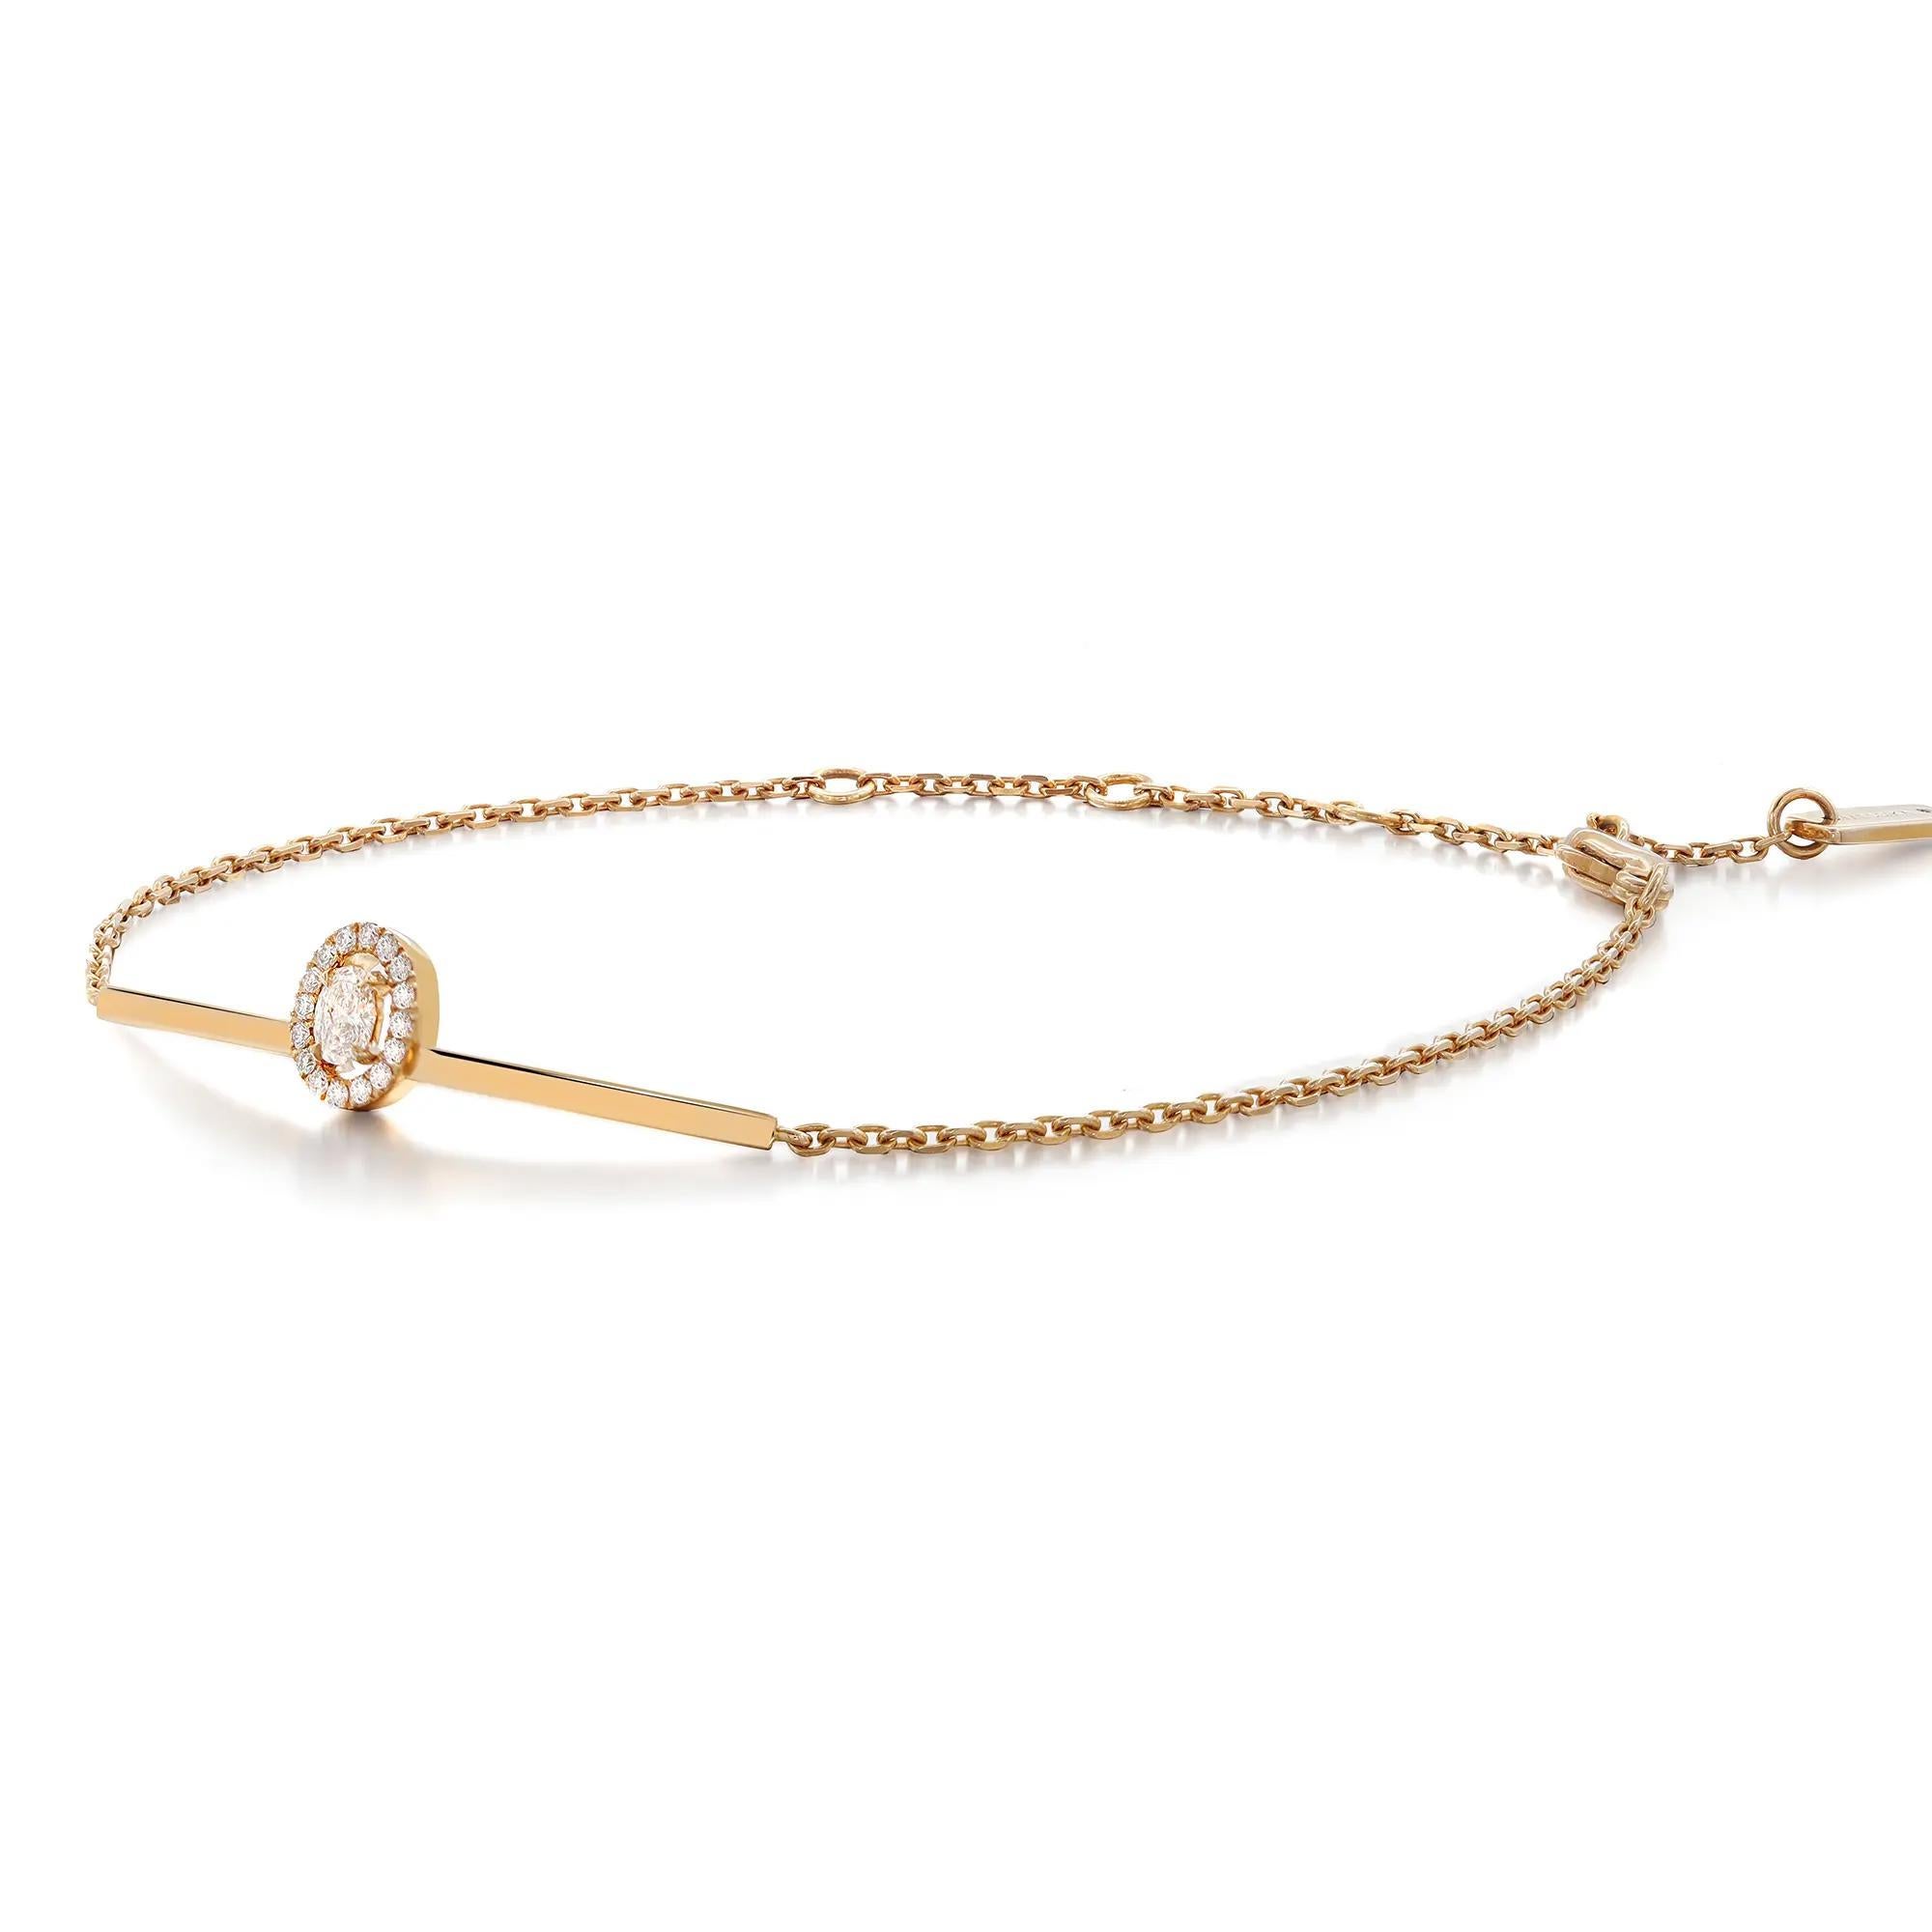 Taille ovale Messika 0.22Cttw Glam'Azone Diamond Chain Bracelet 18K Rose Gold 8 Inches en vente